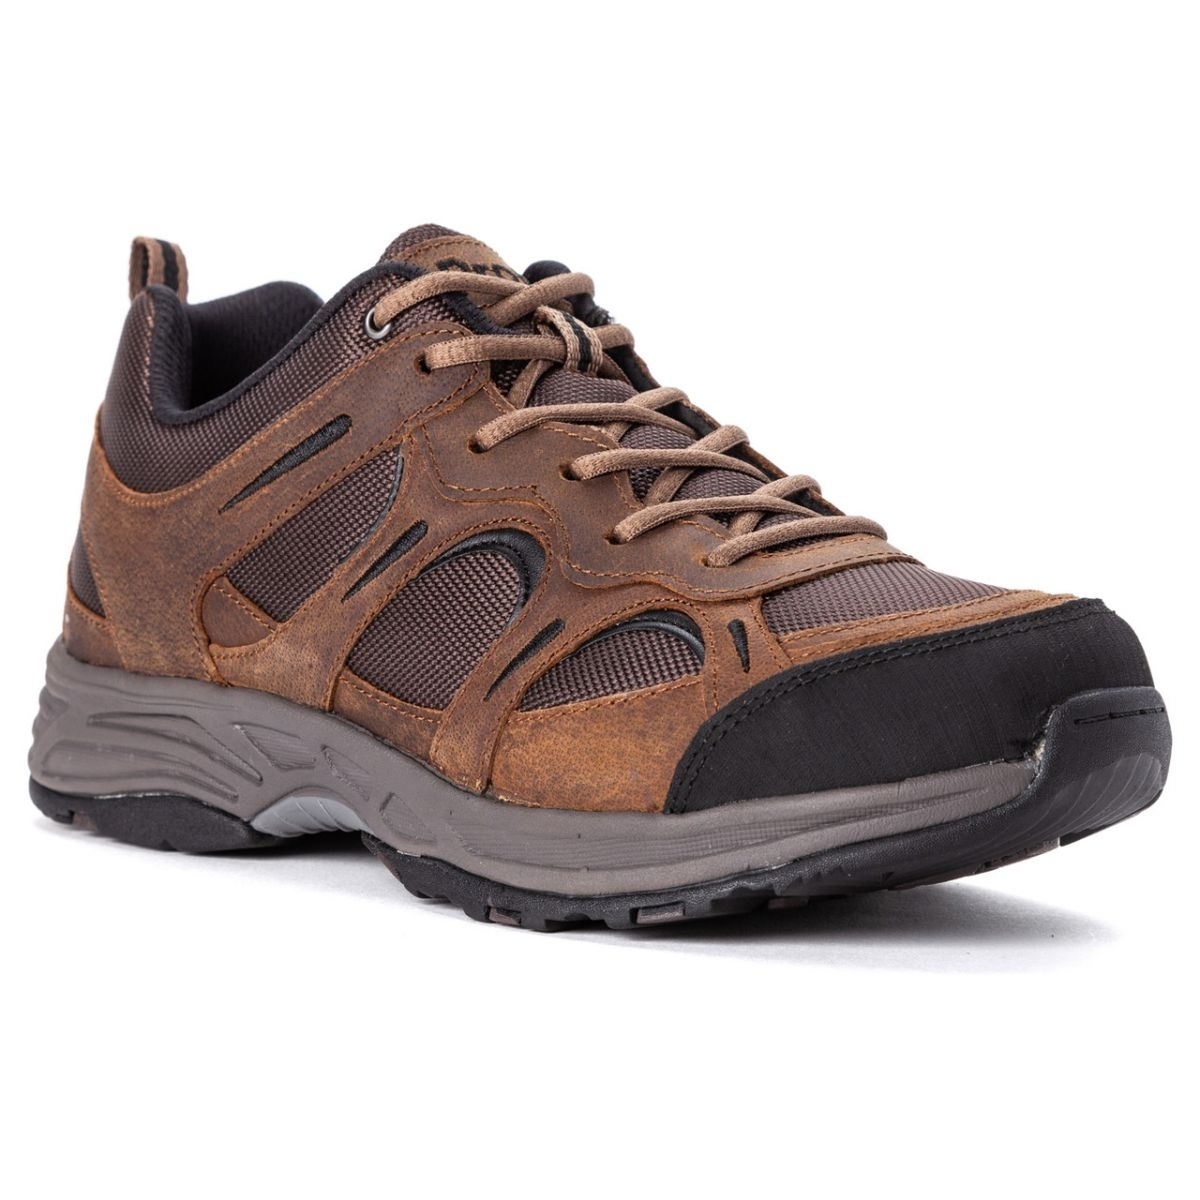 Propet Men's Connelly Hiking Shoe Brown - M5503BR BROWN - BROWN, 15-D